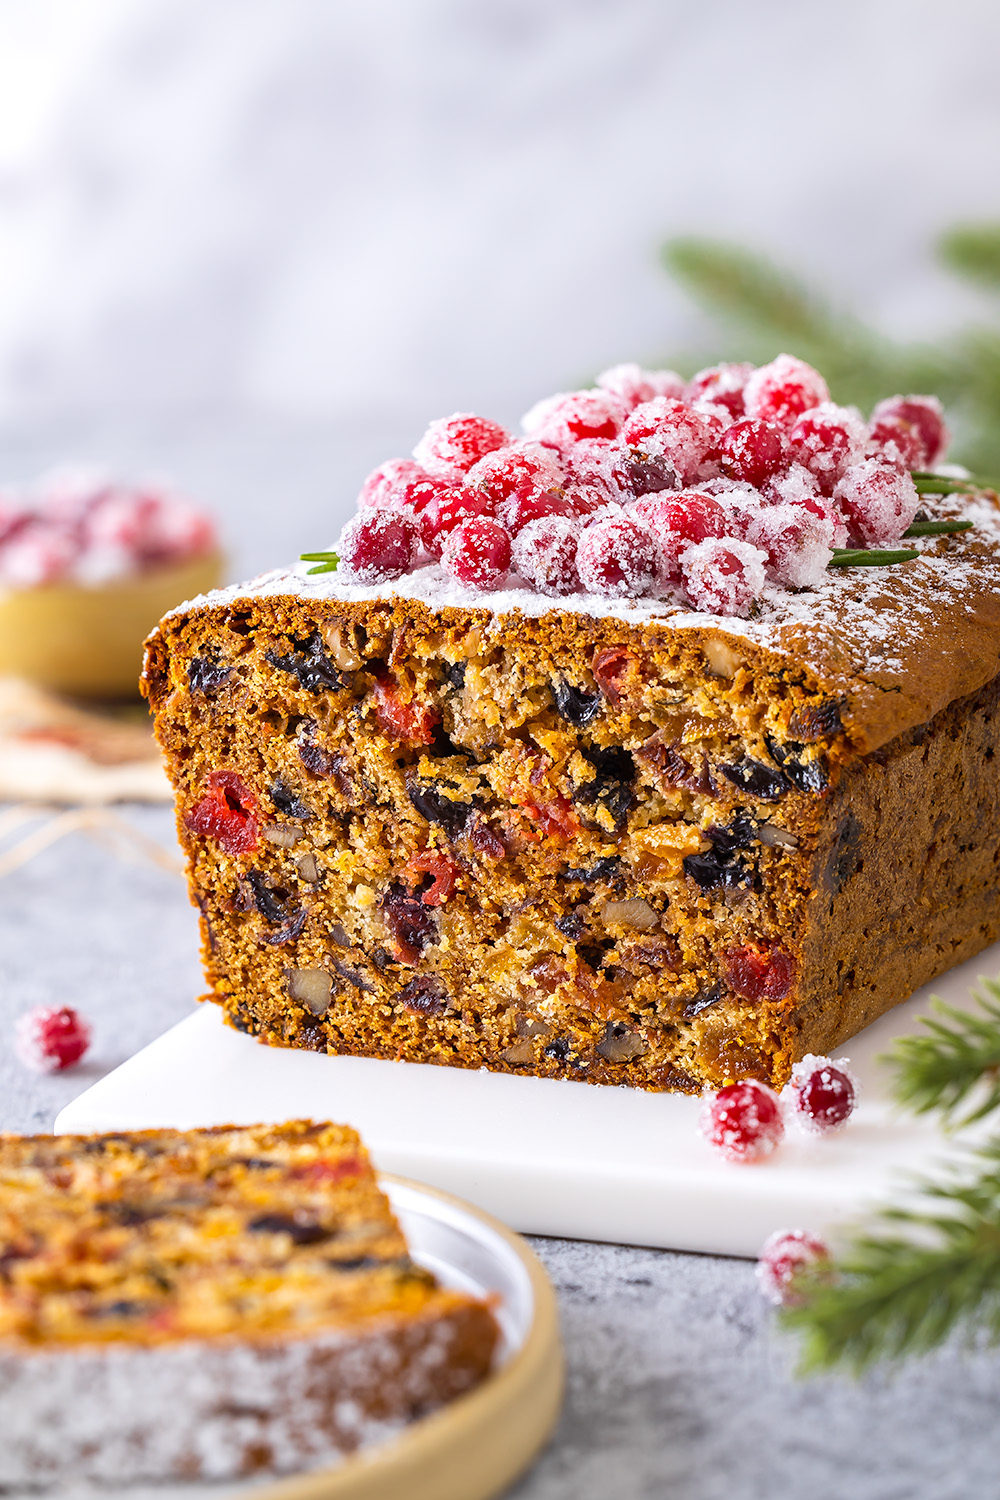 Icebox Fruitcake Recipe Made with Graham Crackers (Includes video)